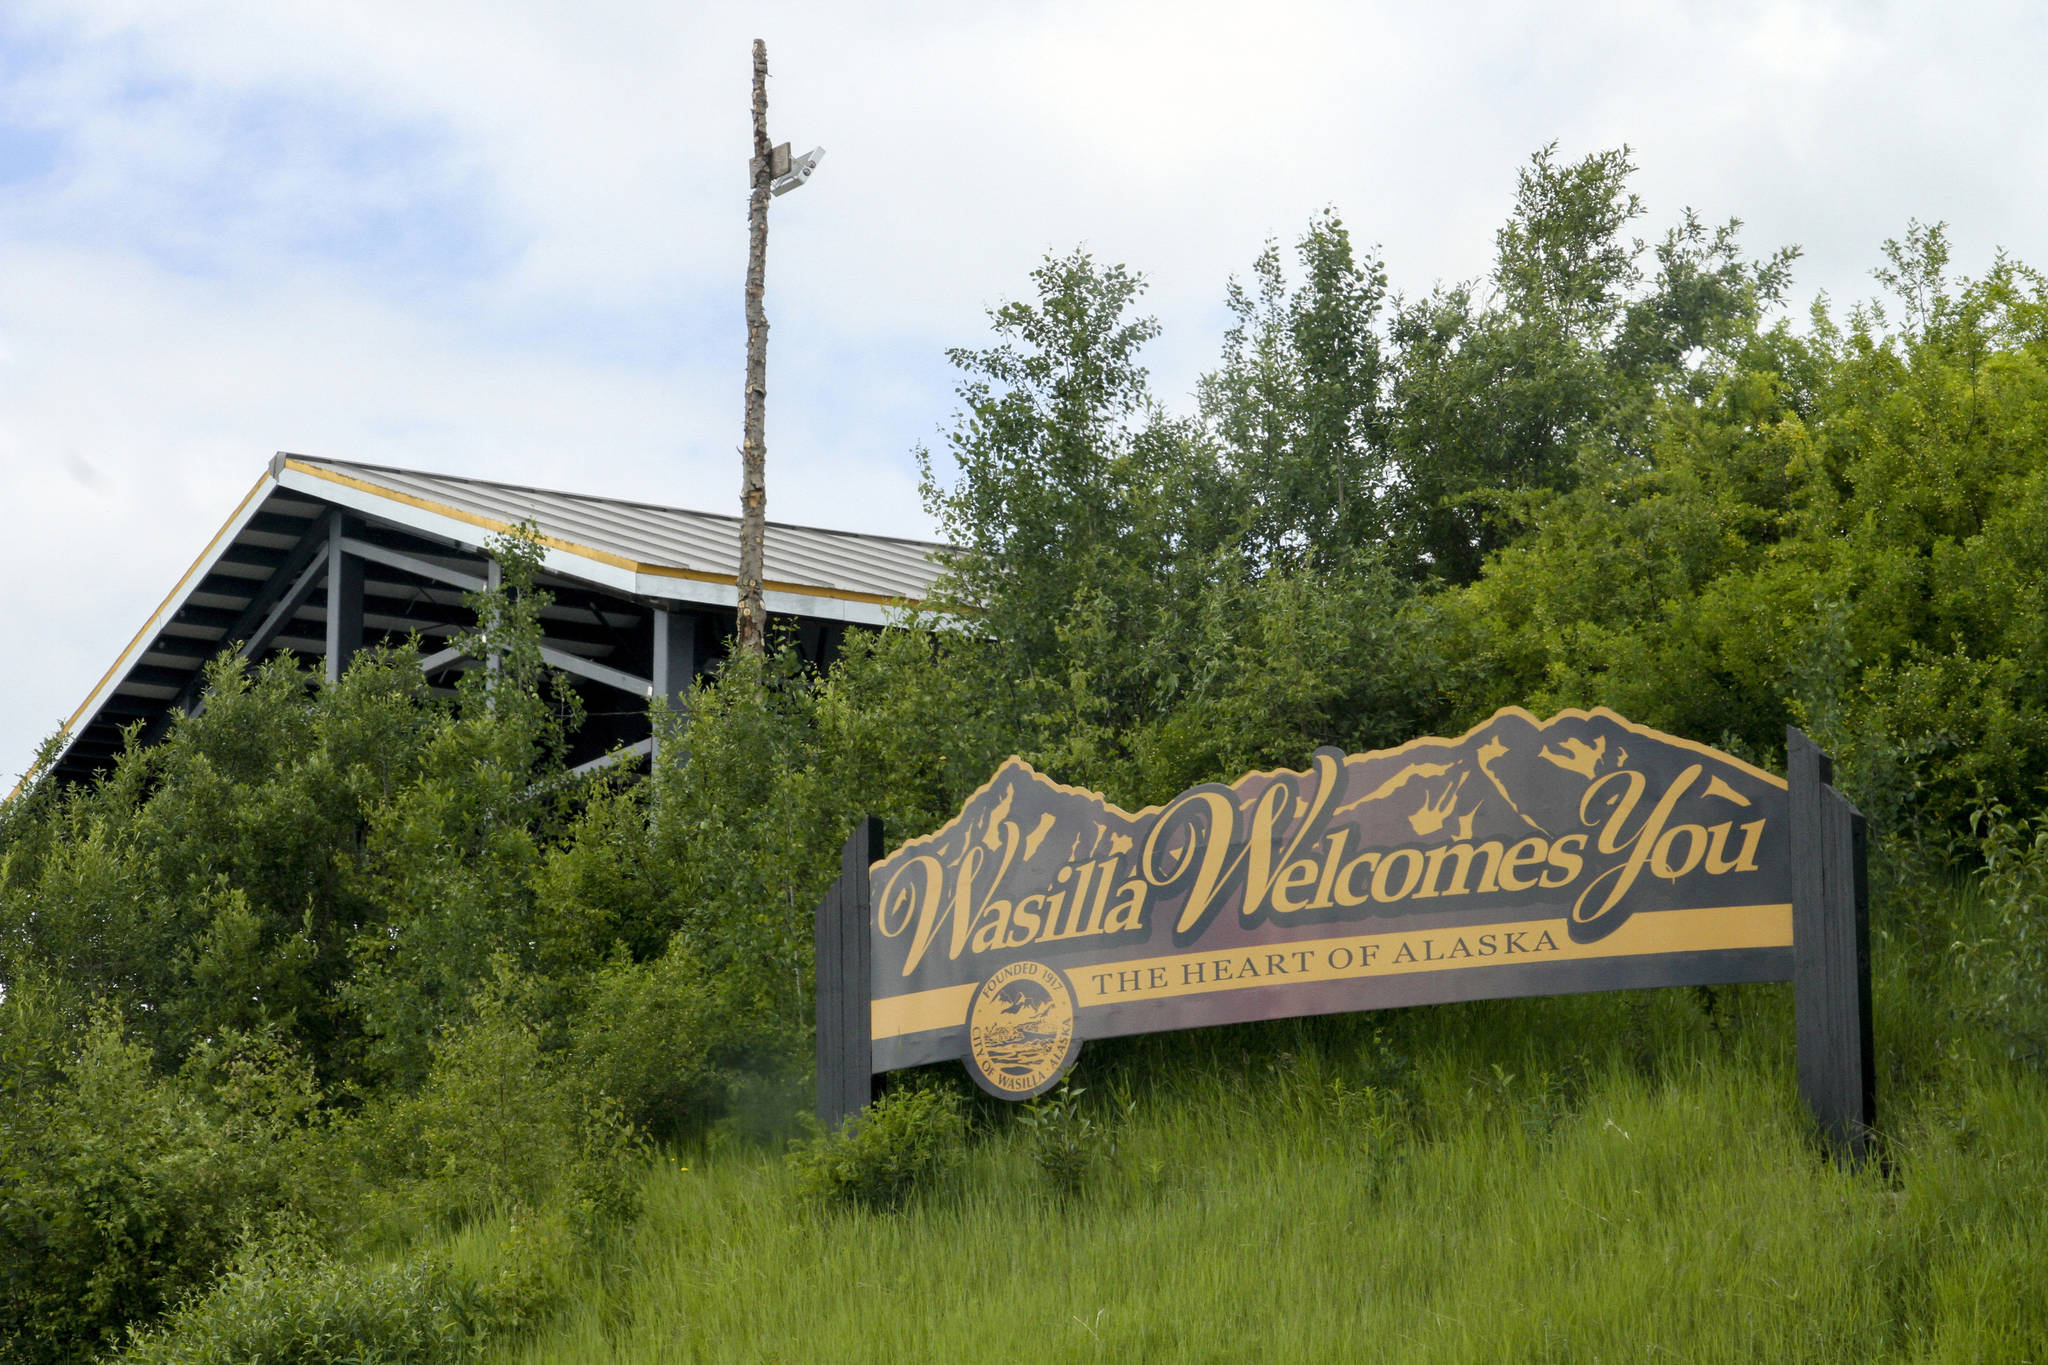 This June 14, 2019 file photo shows a welcome sign on the outskirts of Wasilla. State lawmakers have rejected Gov. Mike Dunleavy’s suggested location for a special session. (AP Photo/Mark Thiessen, File)